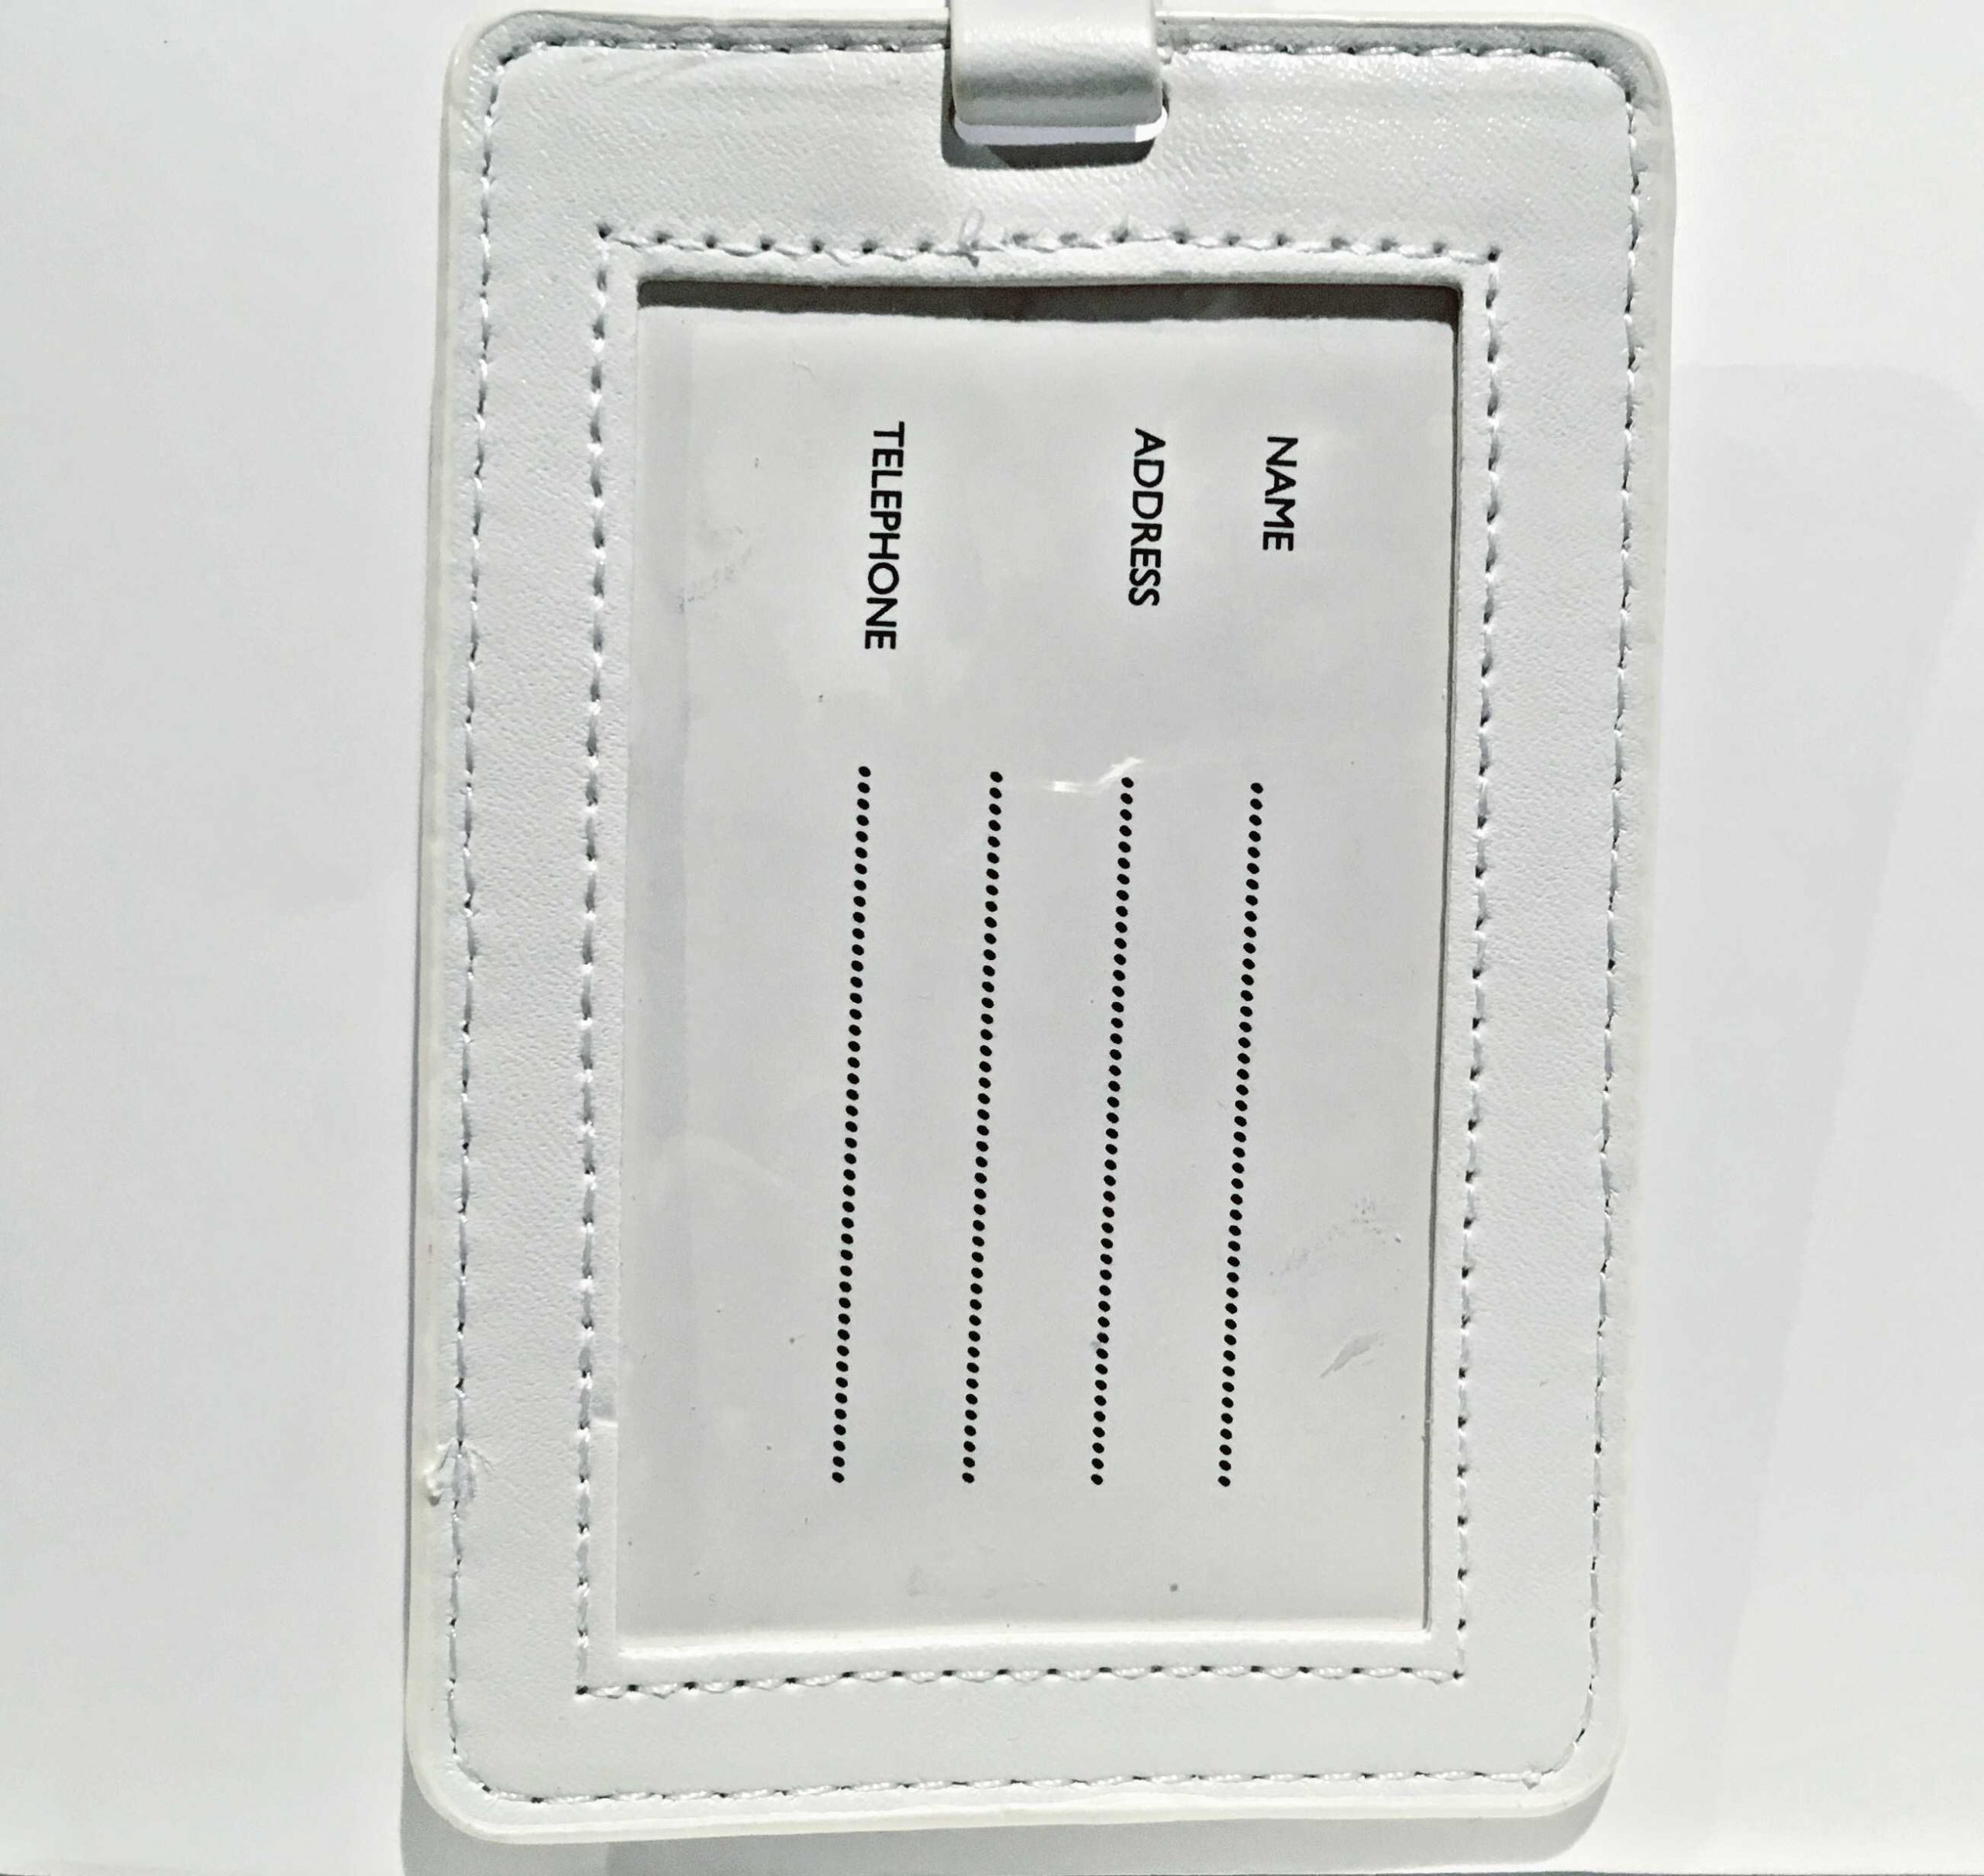 Snare Drum Luggage Tag